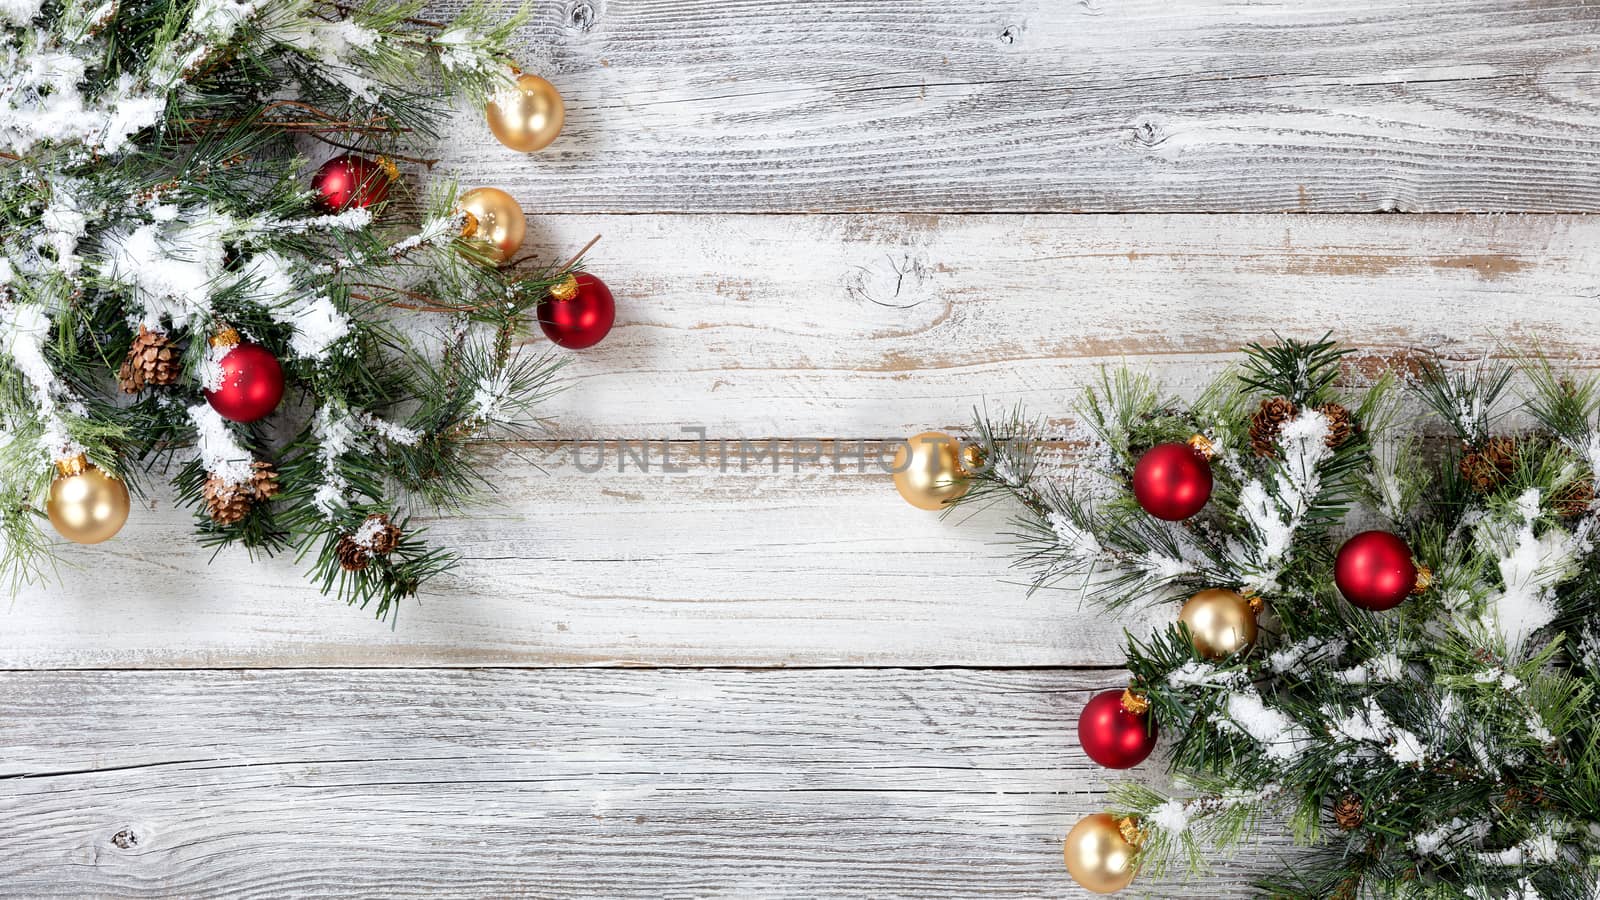 Christmas Rough Fir Tree decorated with red and gold ornaments on Weathered White Wooden Background